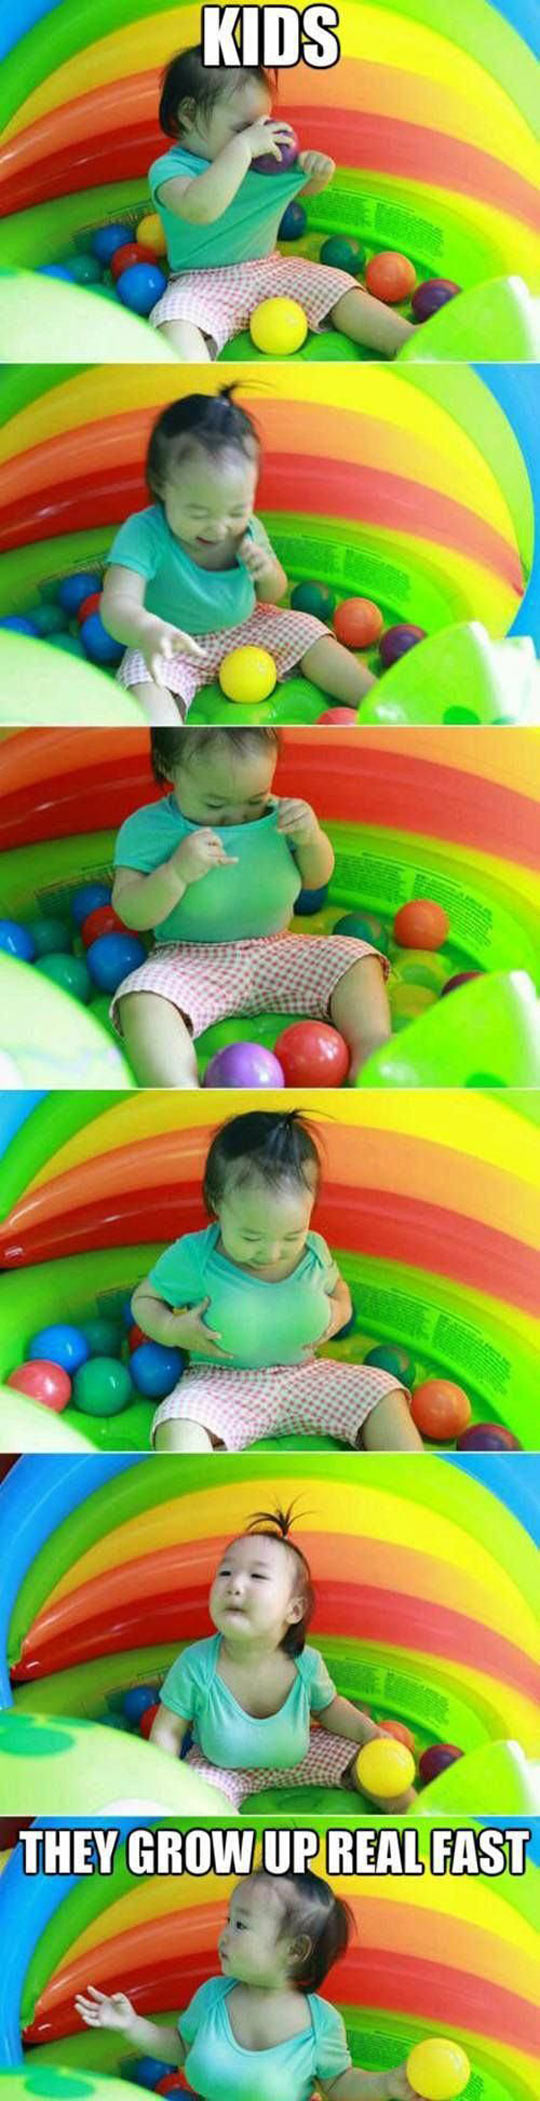 funny-Asian-baby-playing-growing